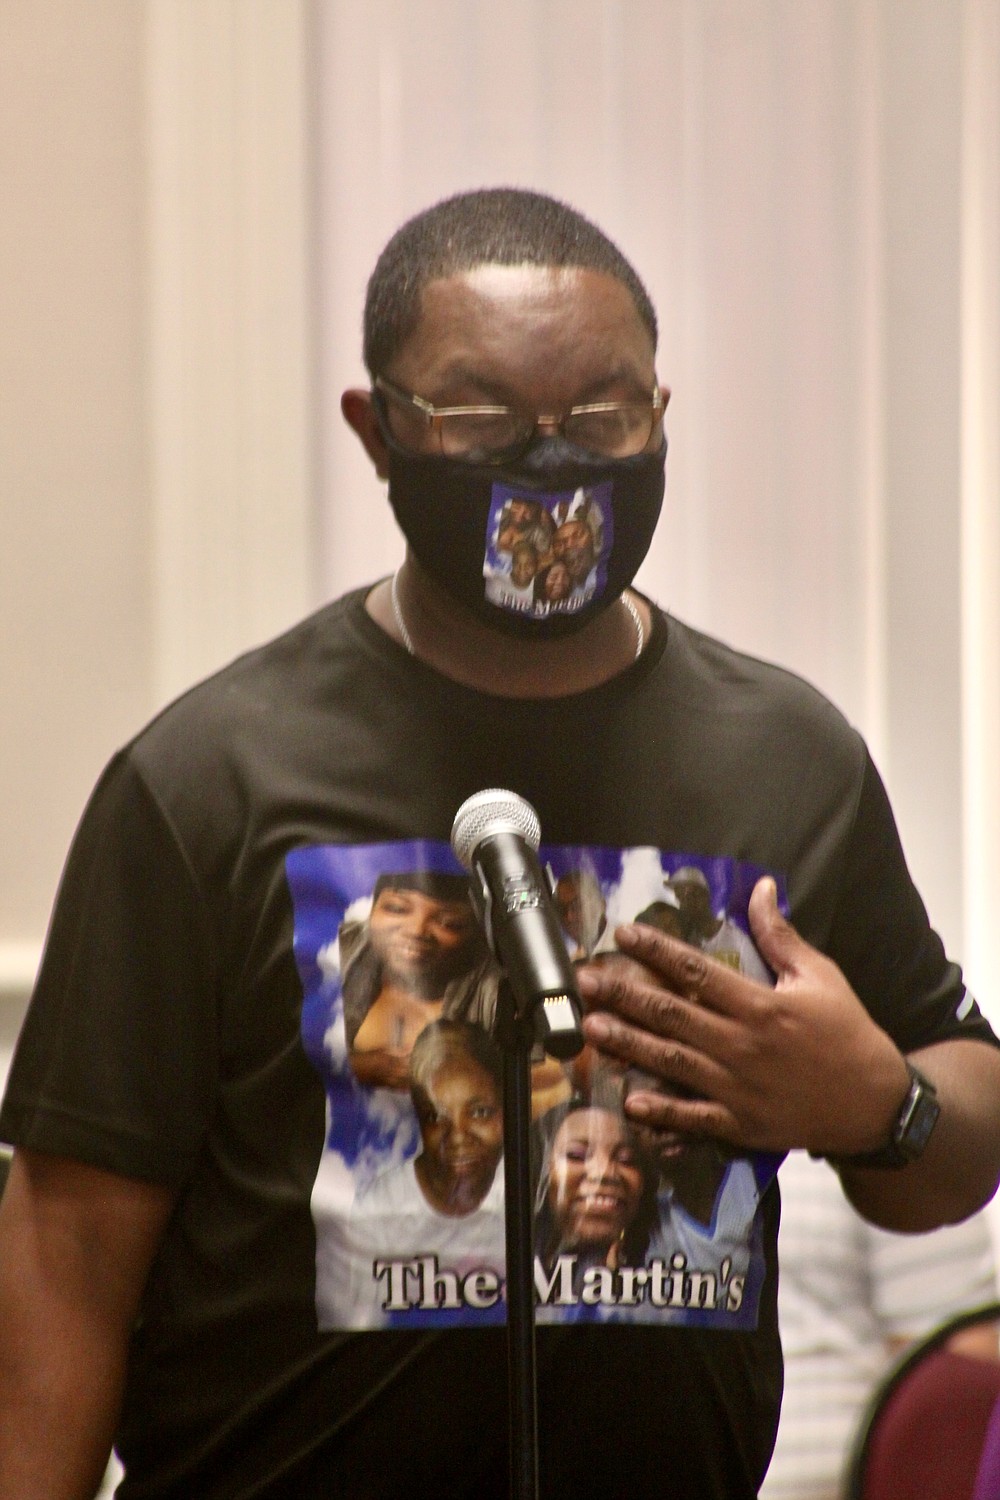 Keith Martin wears a picture of his late wife Tina Martin on his shirt and said her death has been hard on him and their children. (Pine Bluff Commercial/Eplunus Colvin)